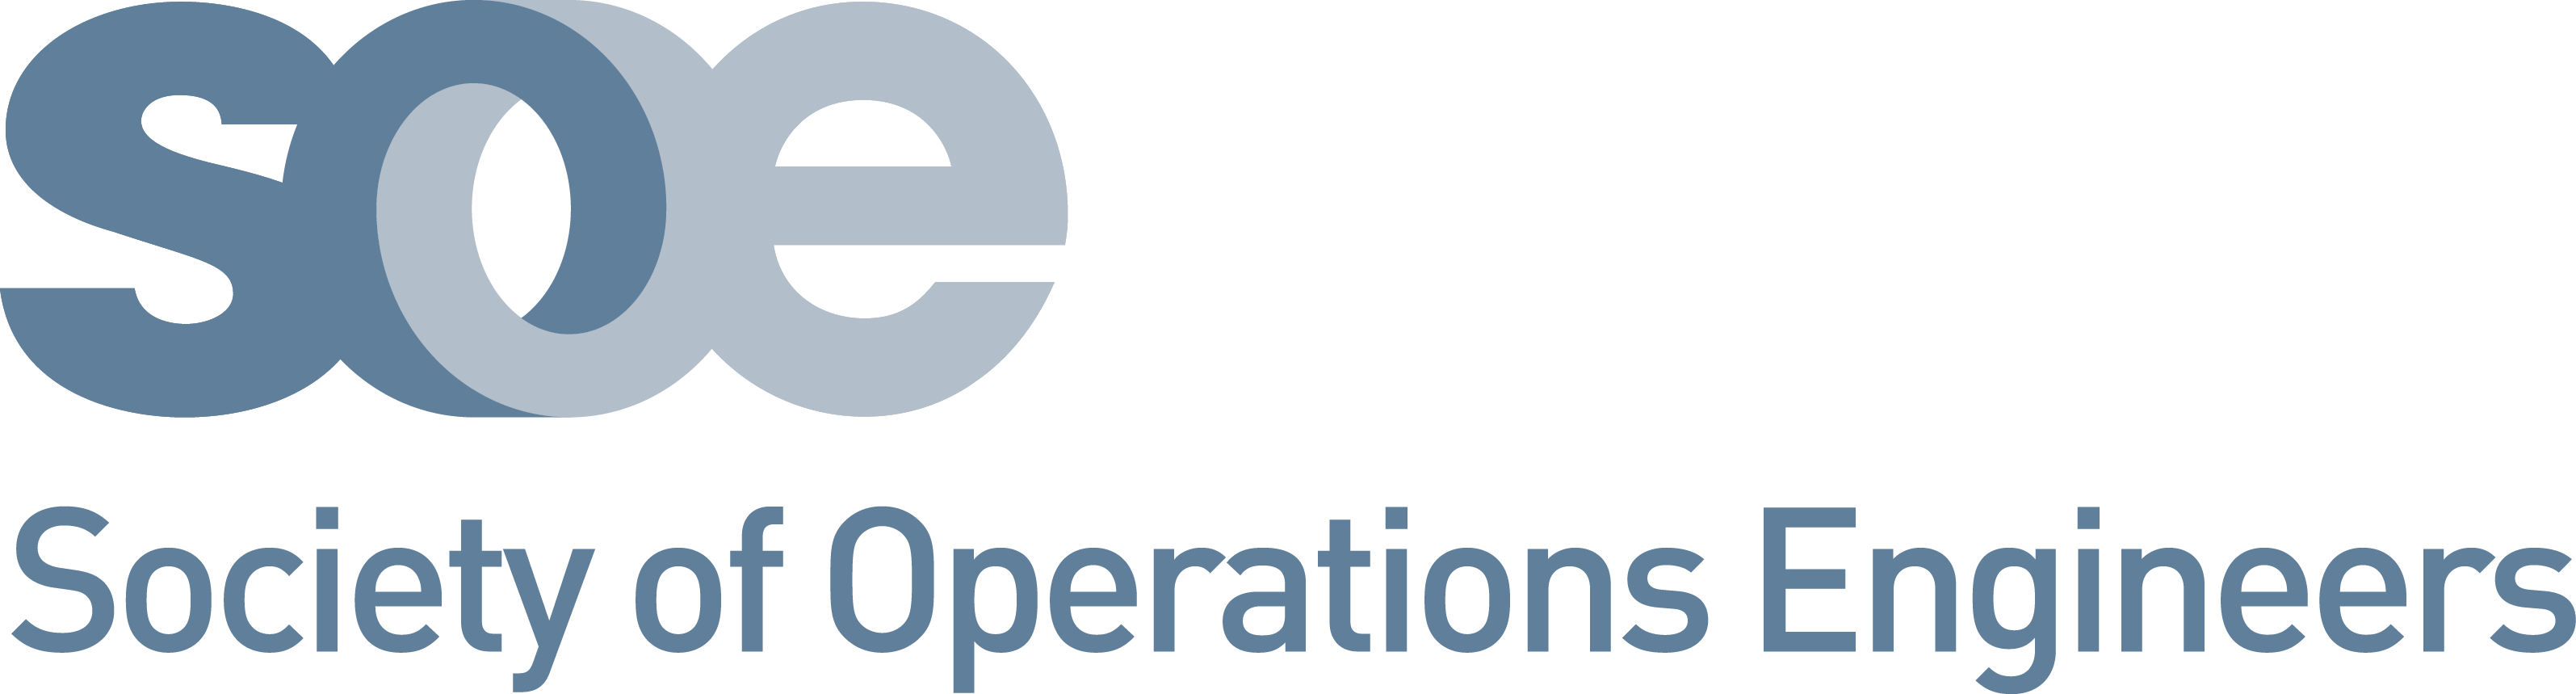 Society of Operations Engineers